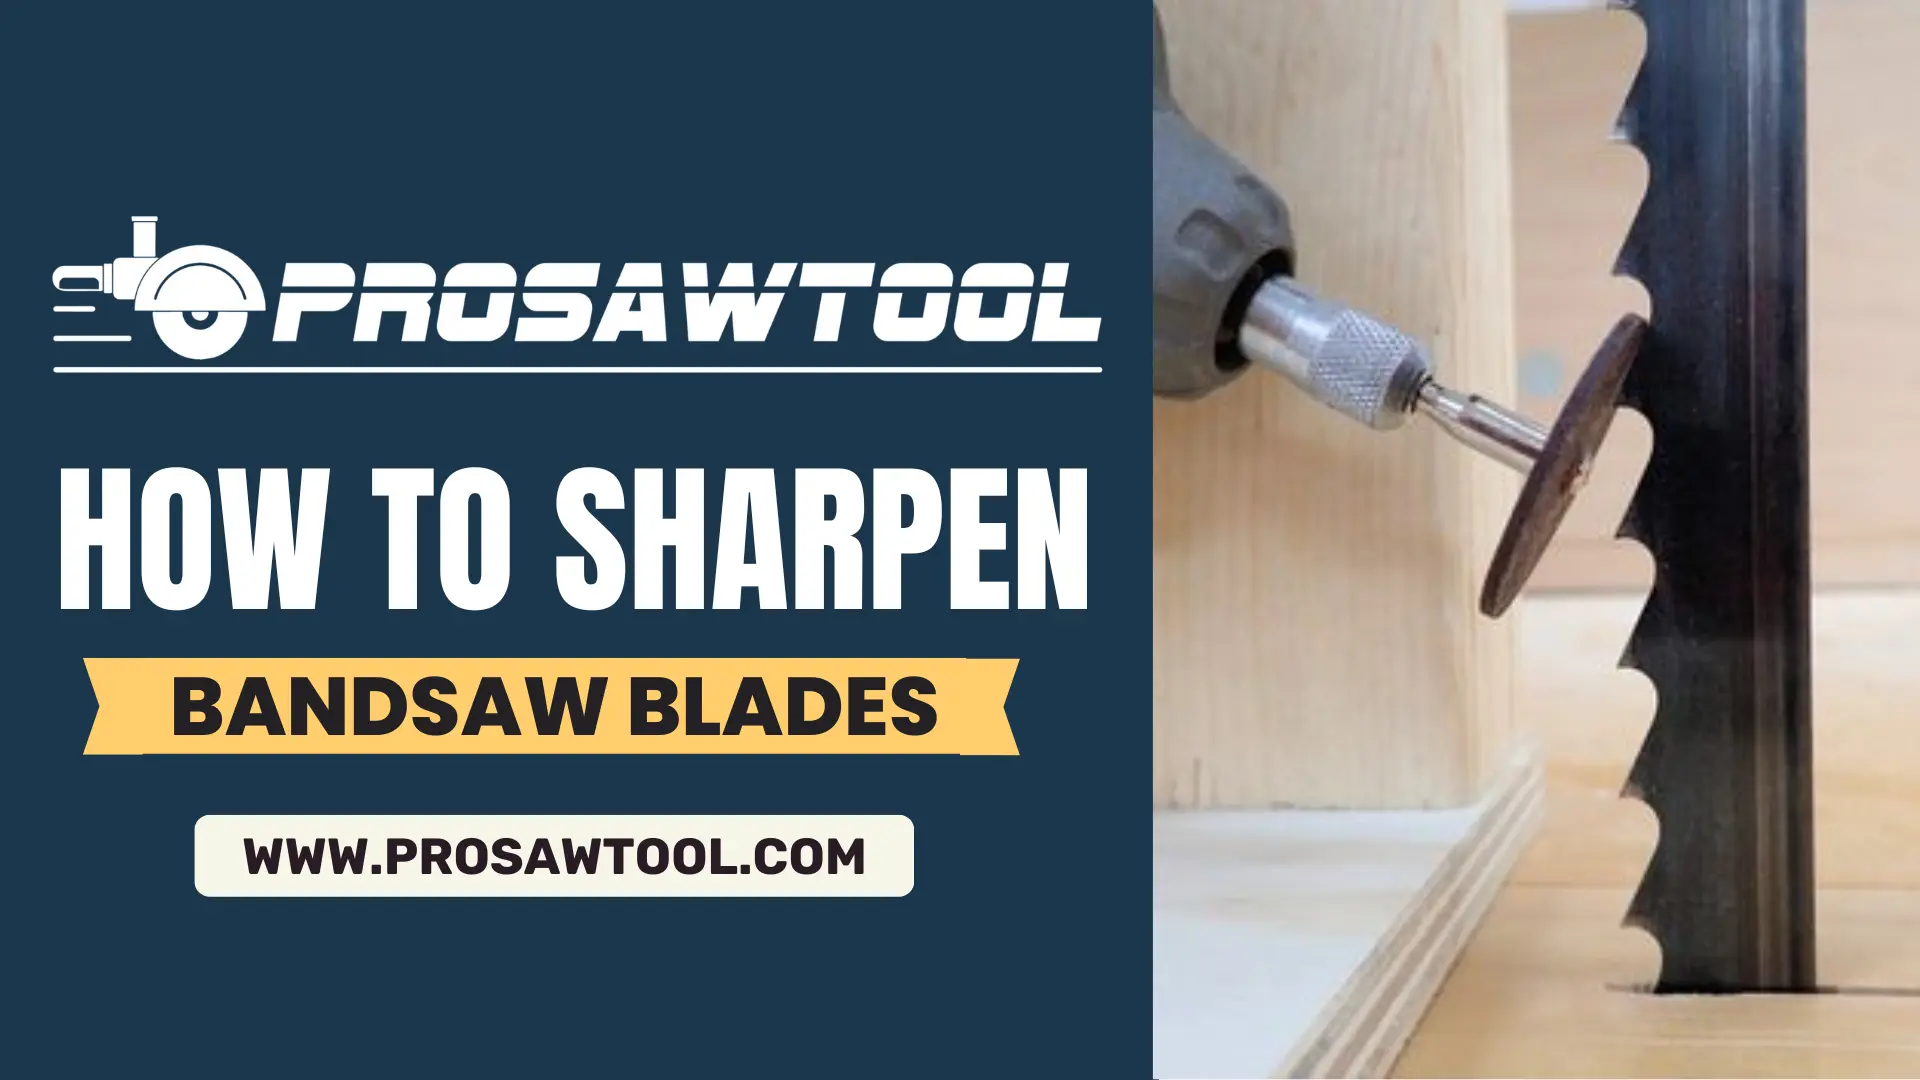 How To Sharpen Bandsaw Blades